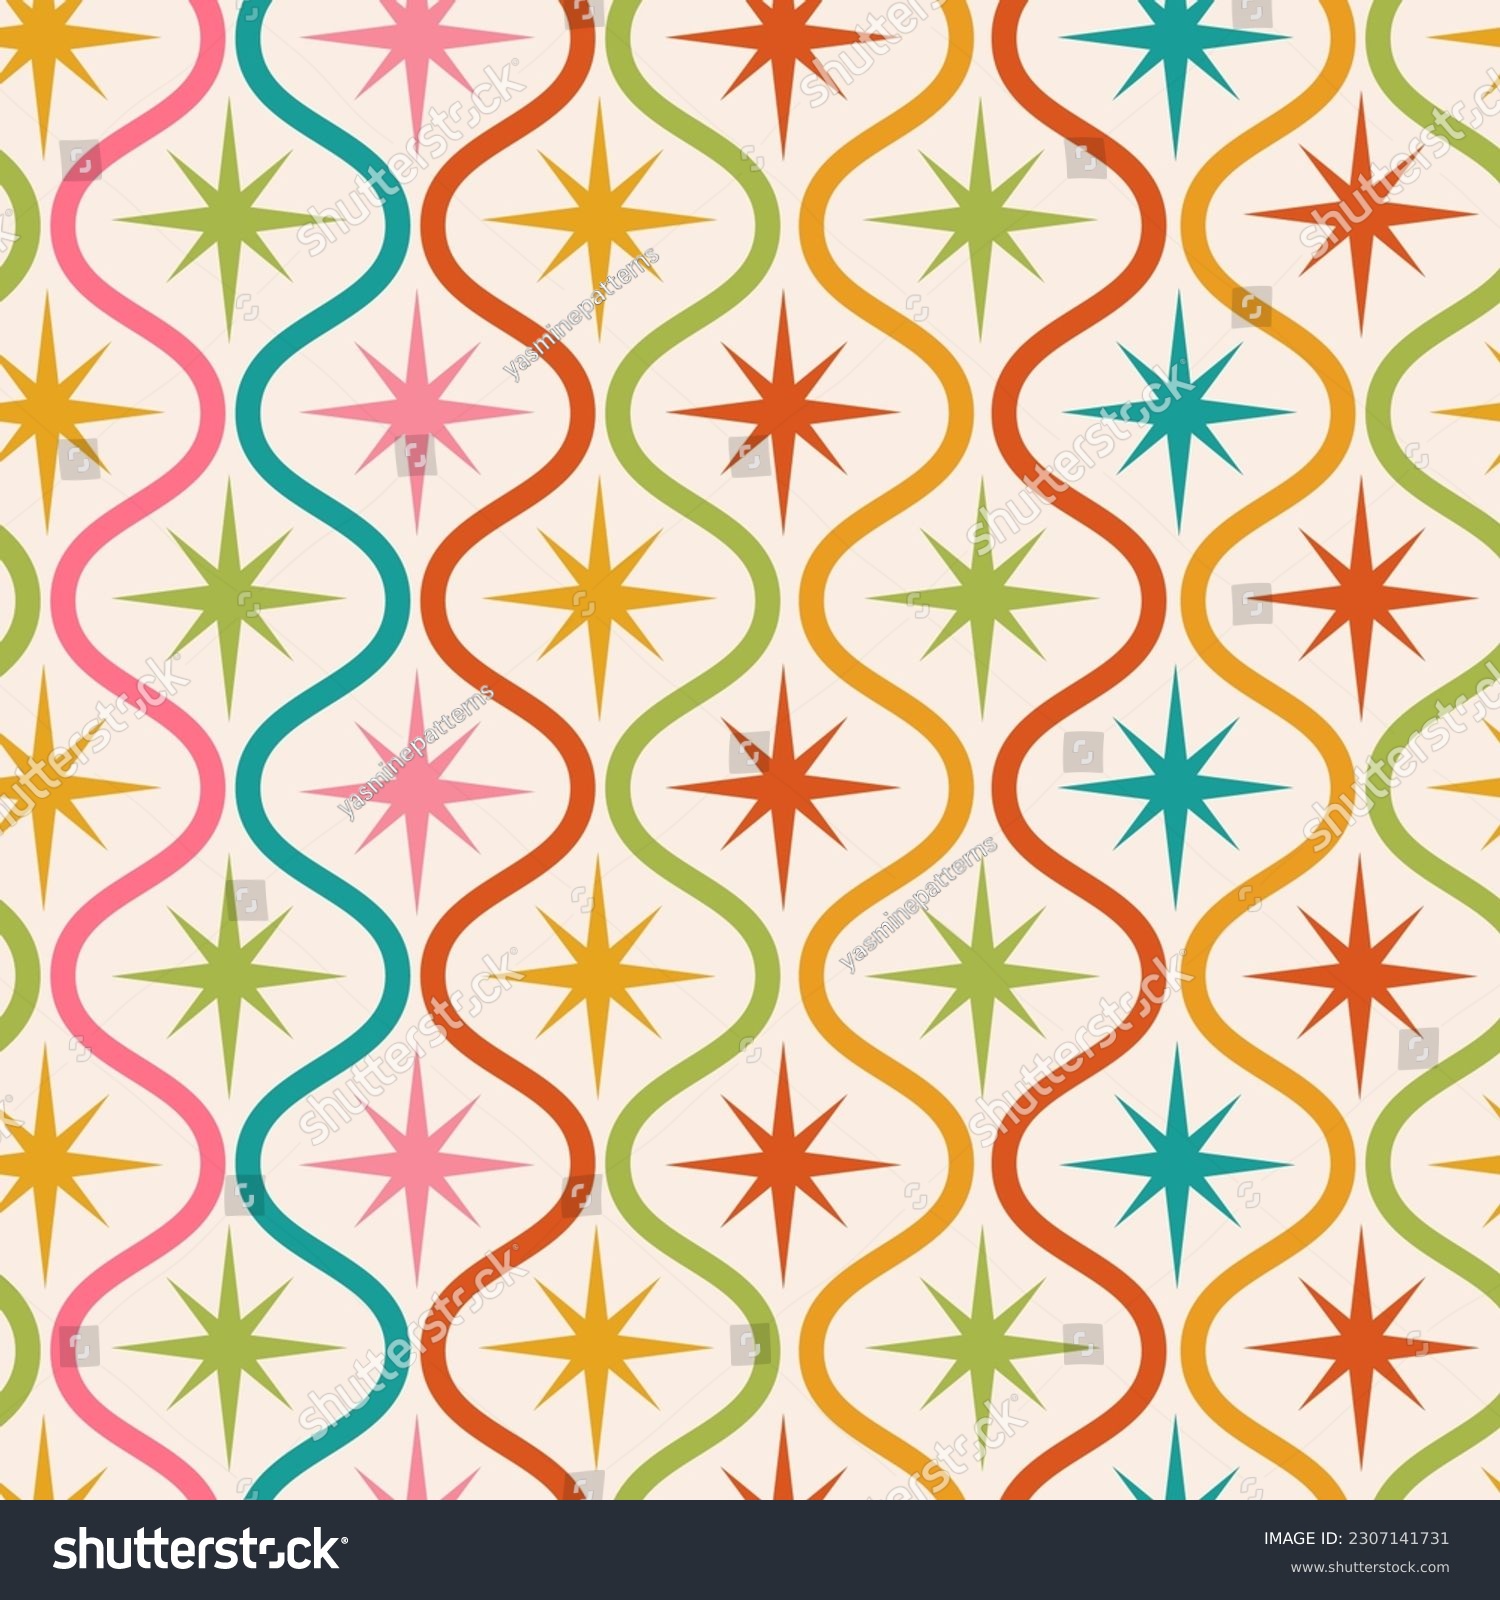 SVG of Mid century colorful starbursts on ogee shapes seamless pattern. For home décor, wallpaper, retro posters, textile and fabric svg